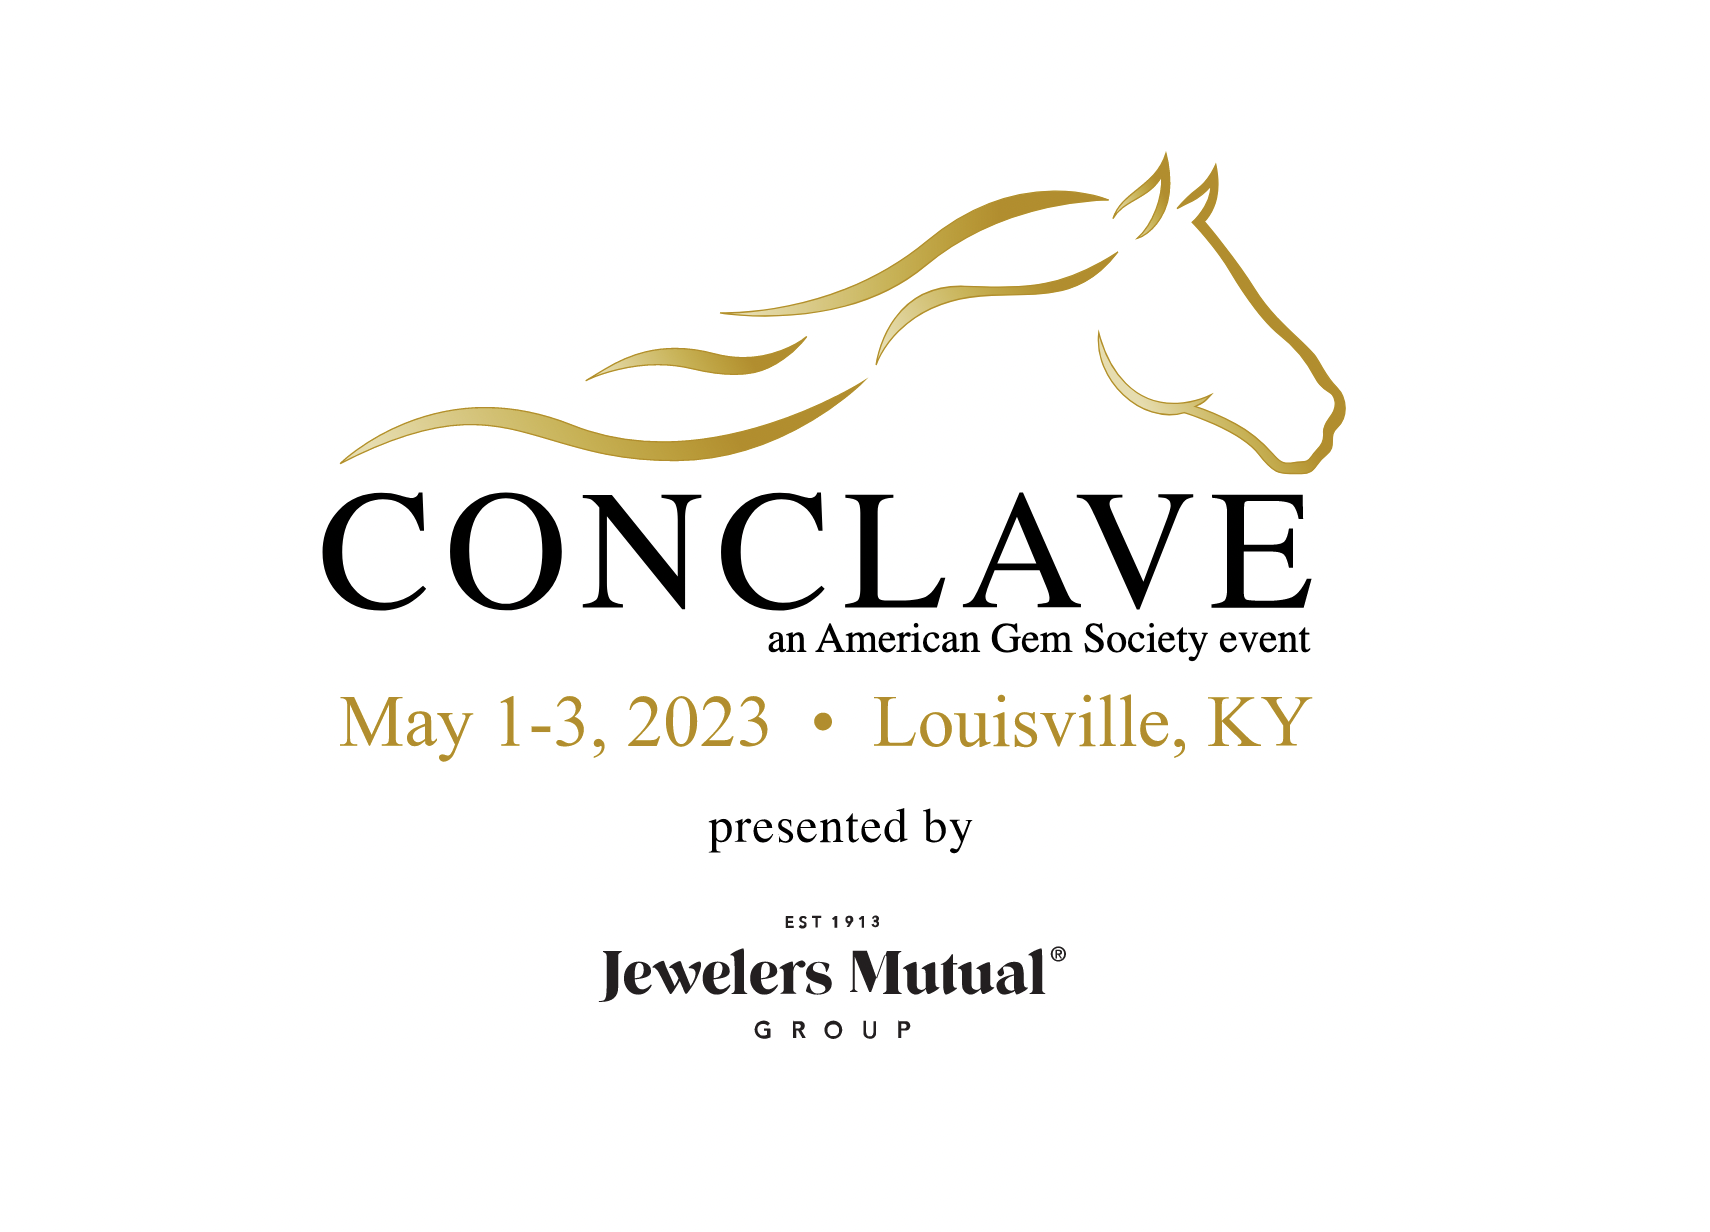 The American Gem Society’s (AGS) International Conclave